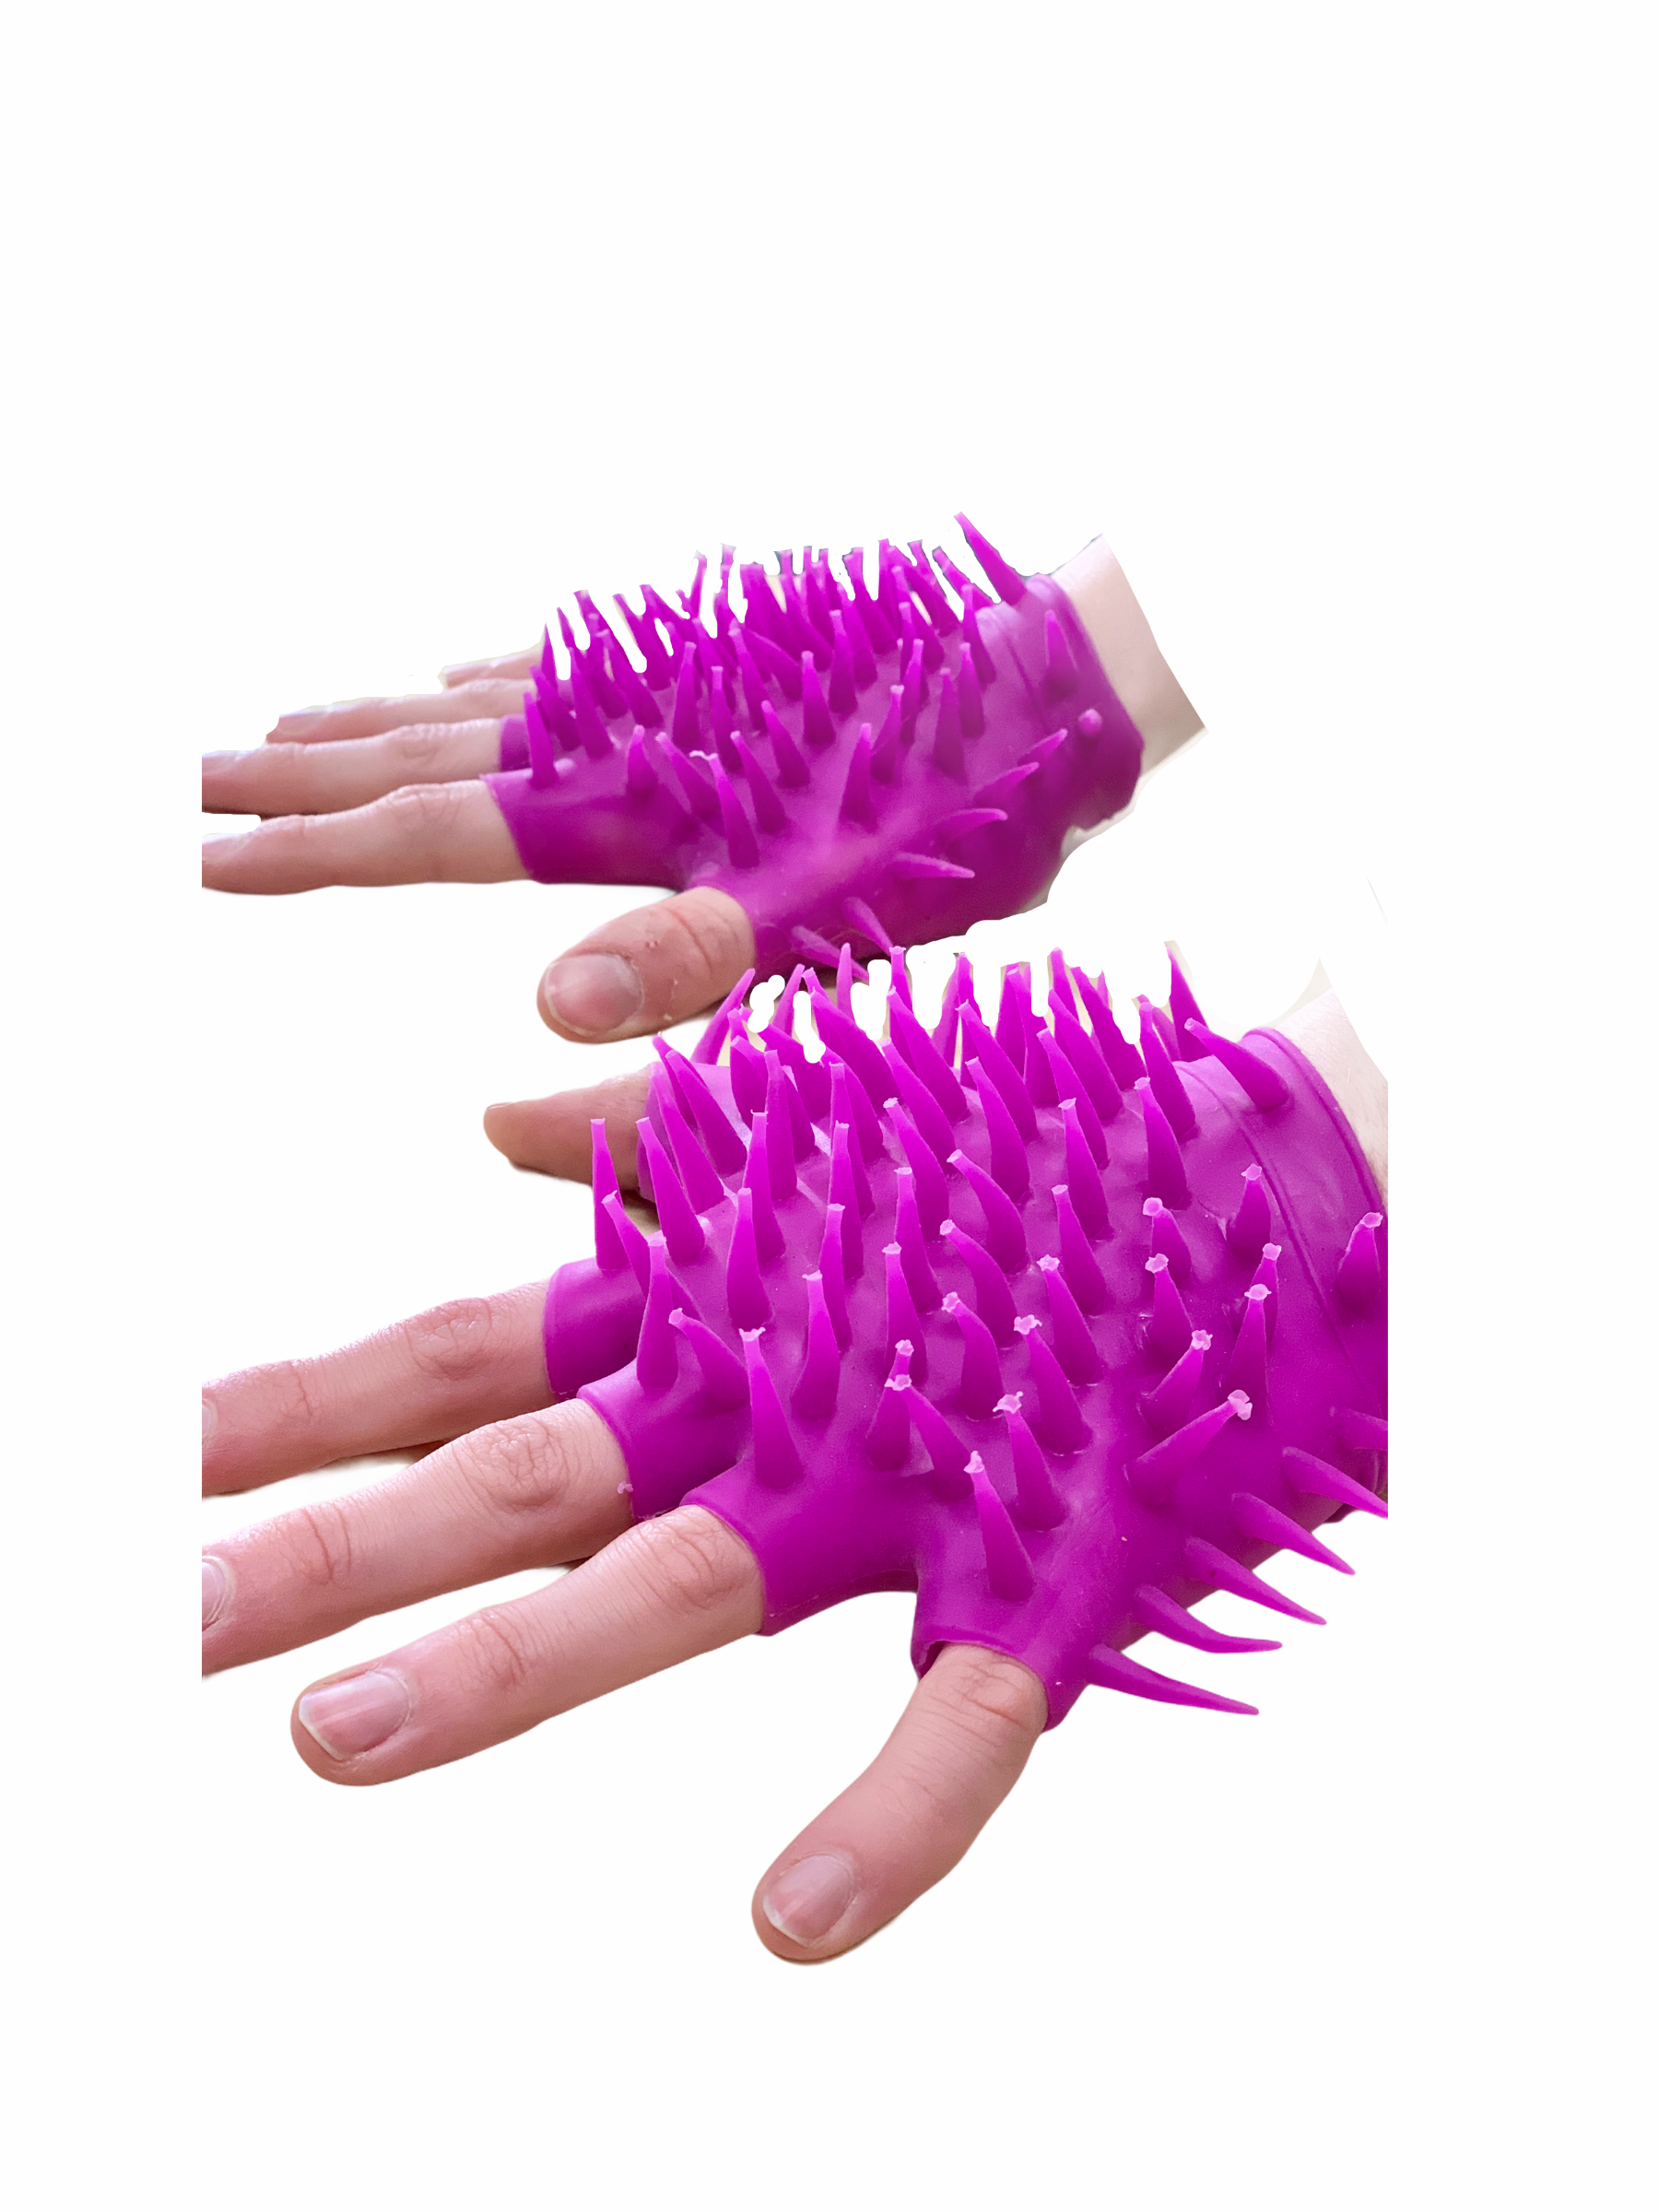 a person wearing the spiky sensory gloves